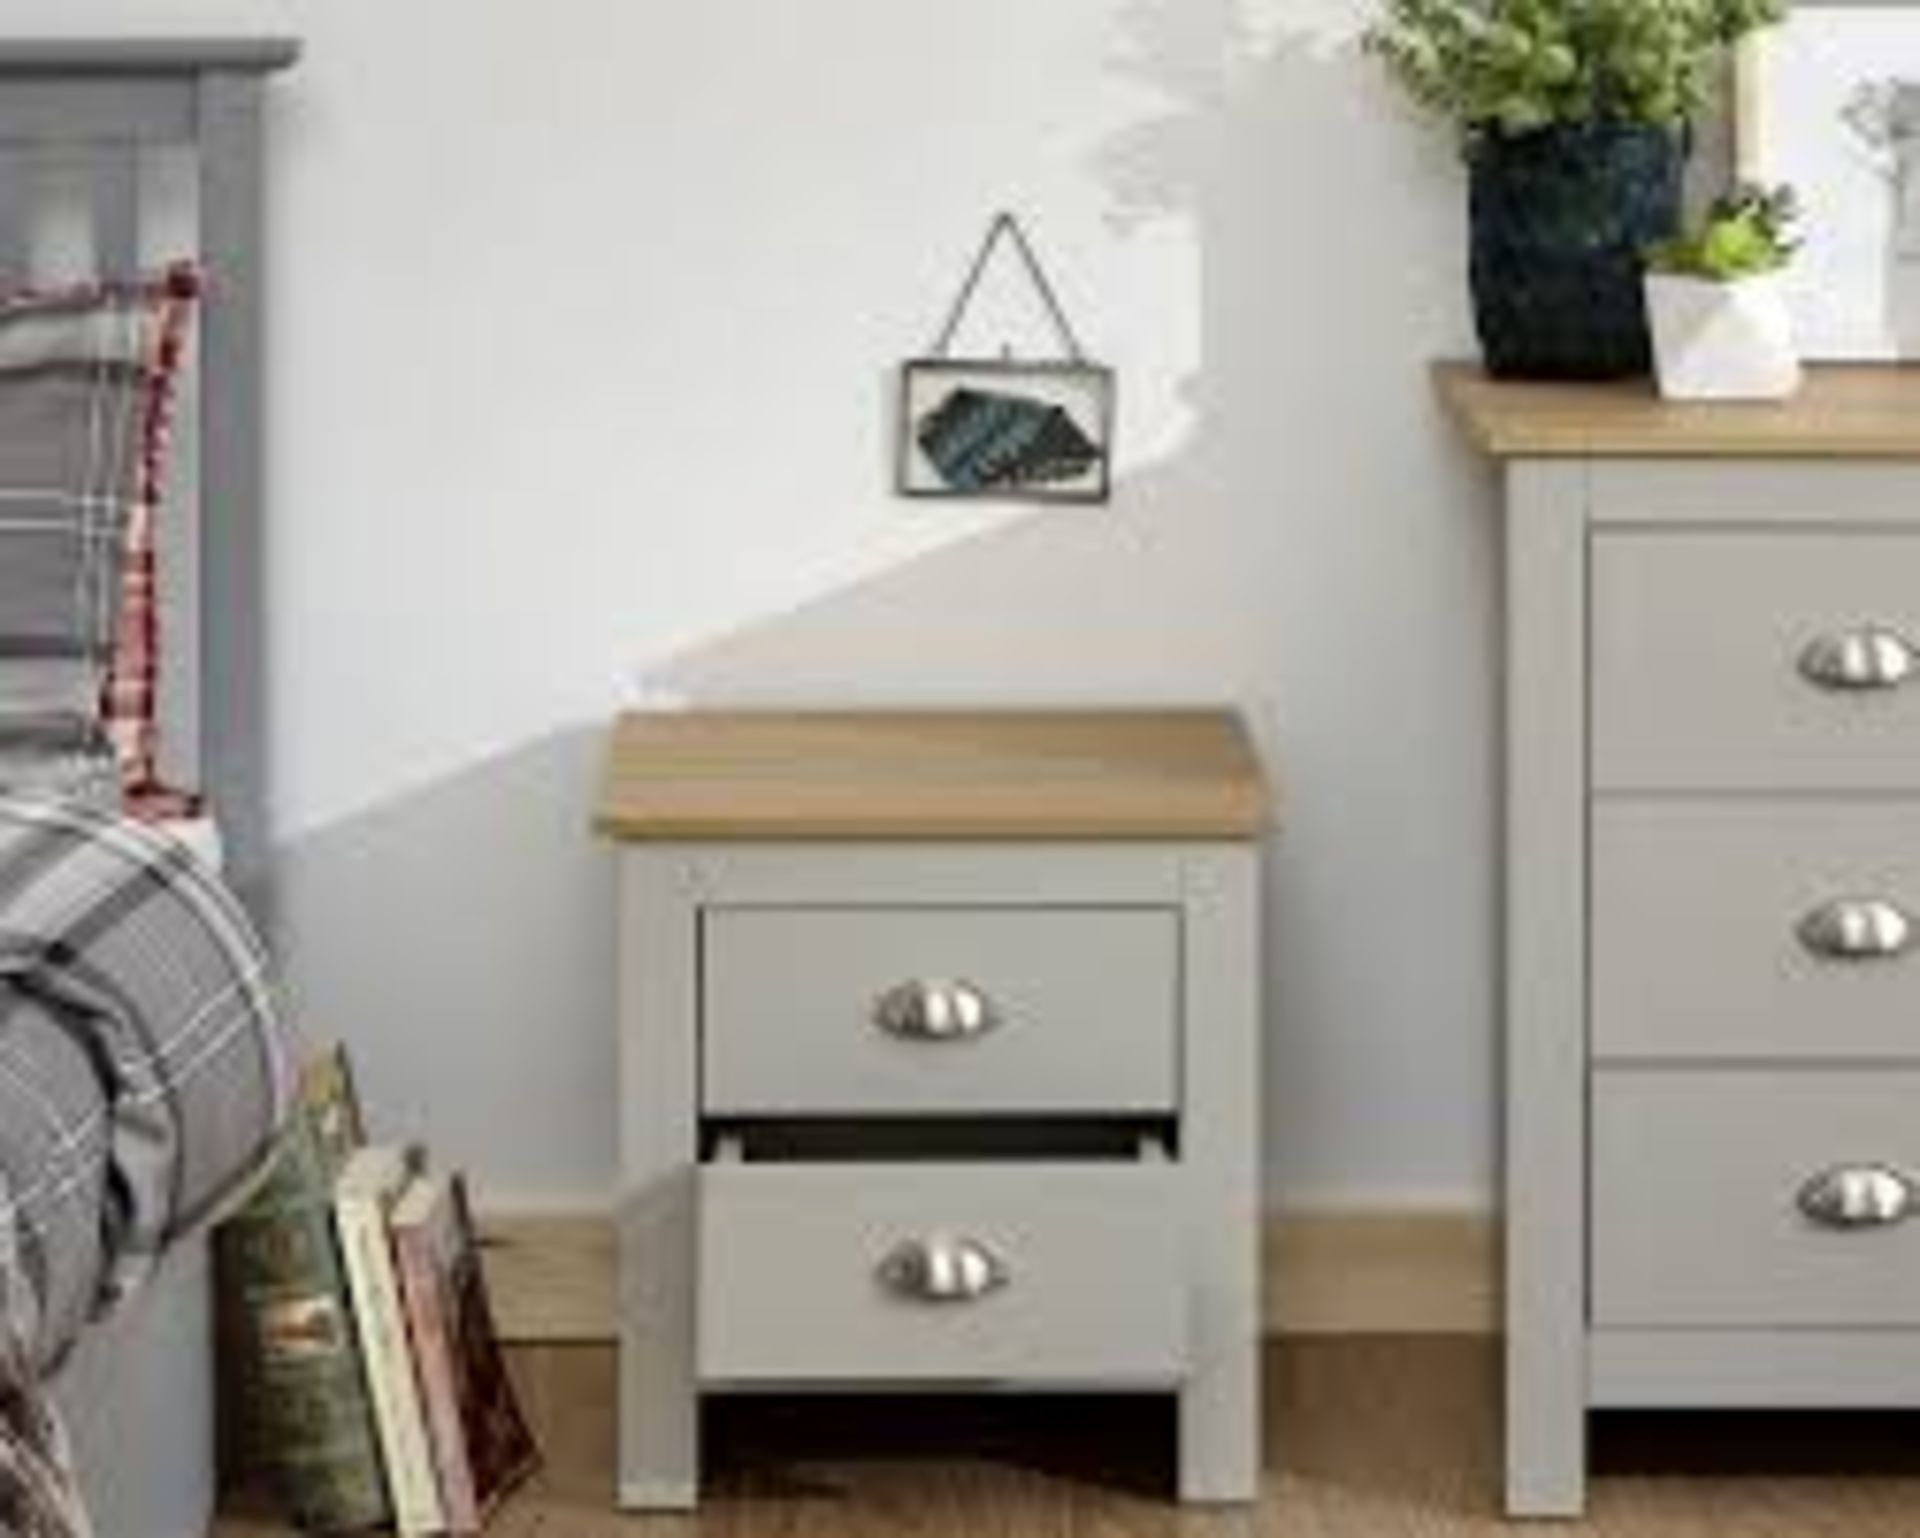 Boxed Lancaster 2 Drawer Bedside Table RRP £70 (Untested Customer Returns)(Photos are for